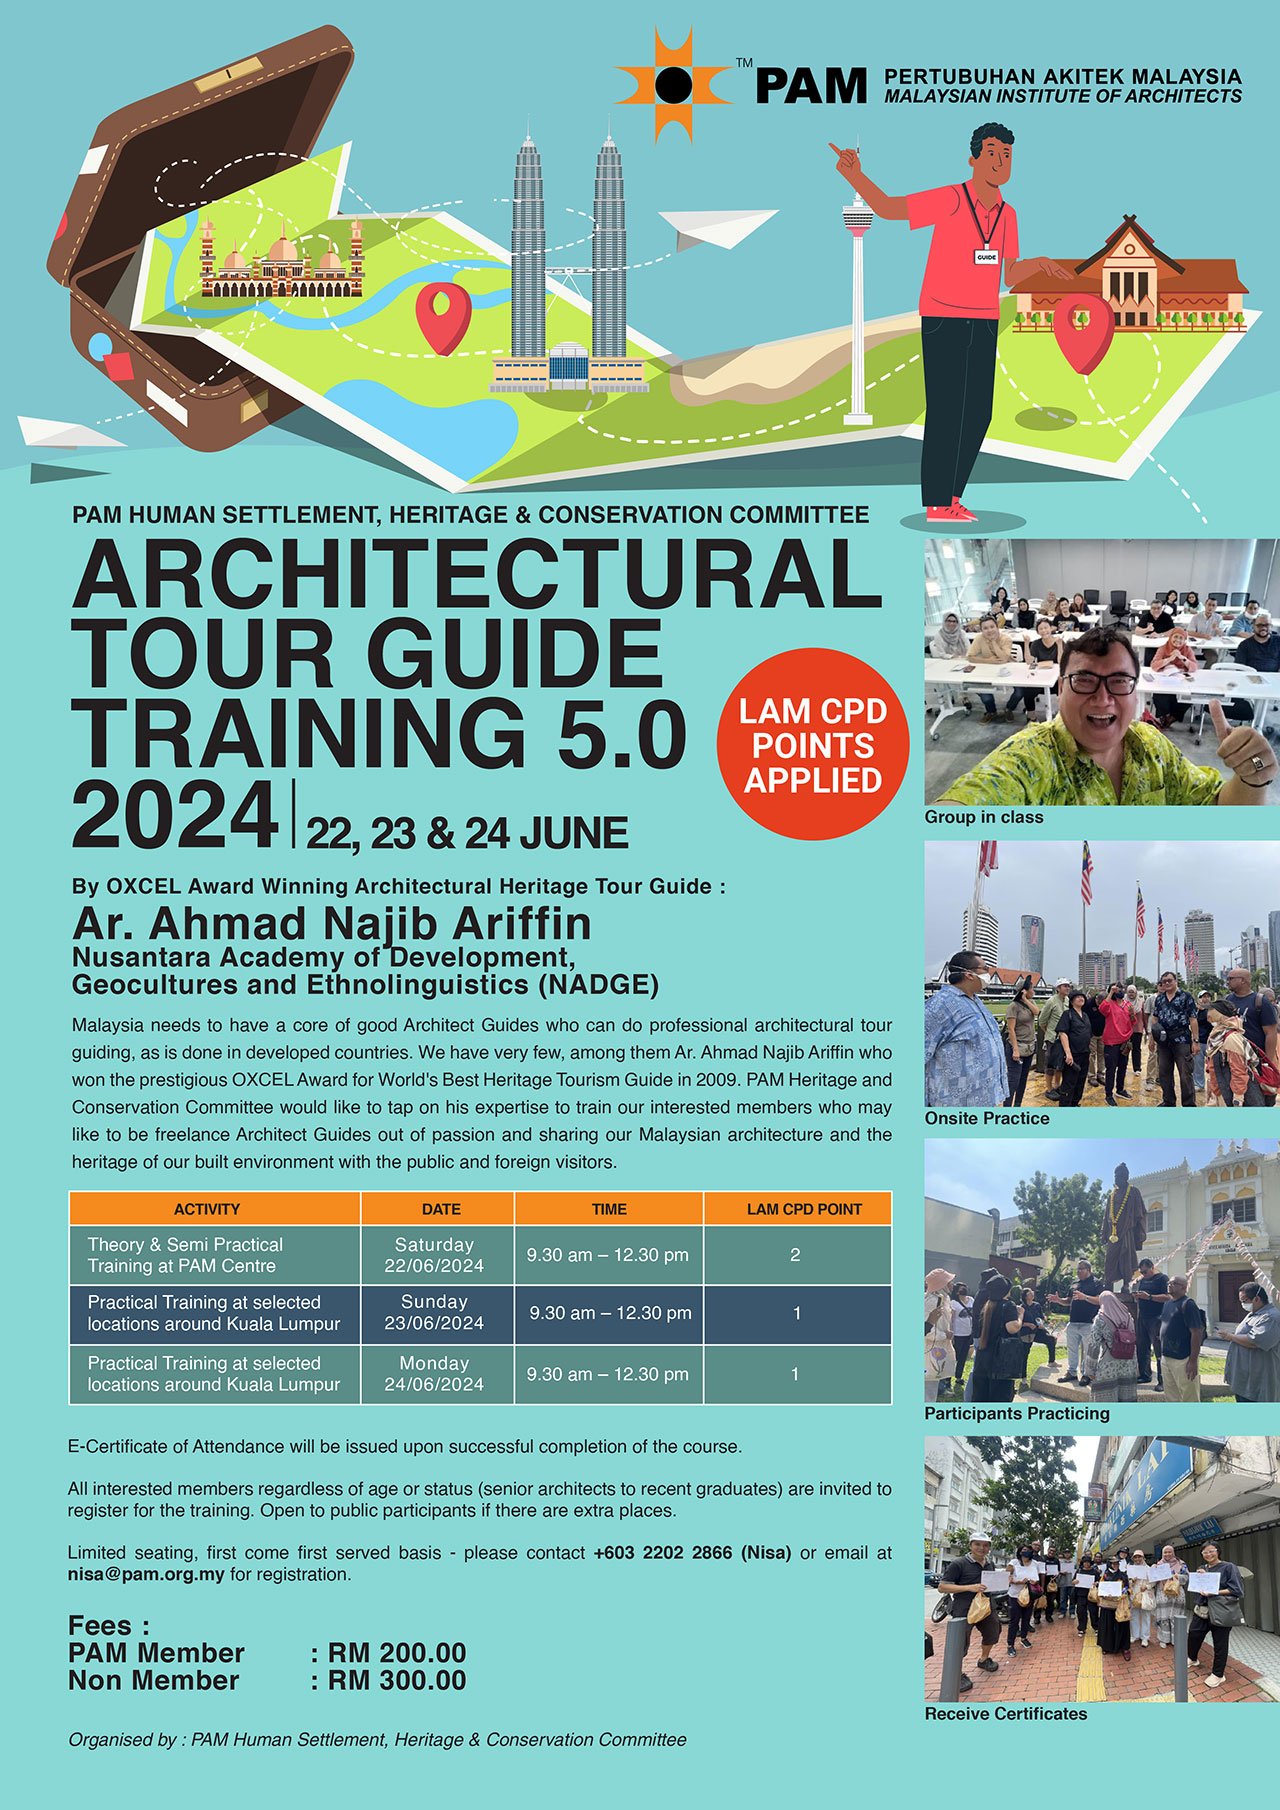 Architectural Tour Guide Training 5.0 2024